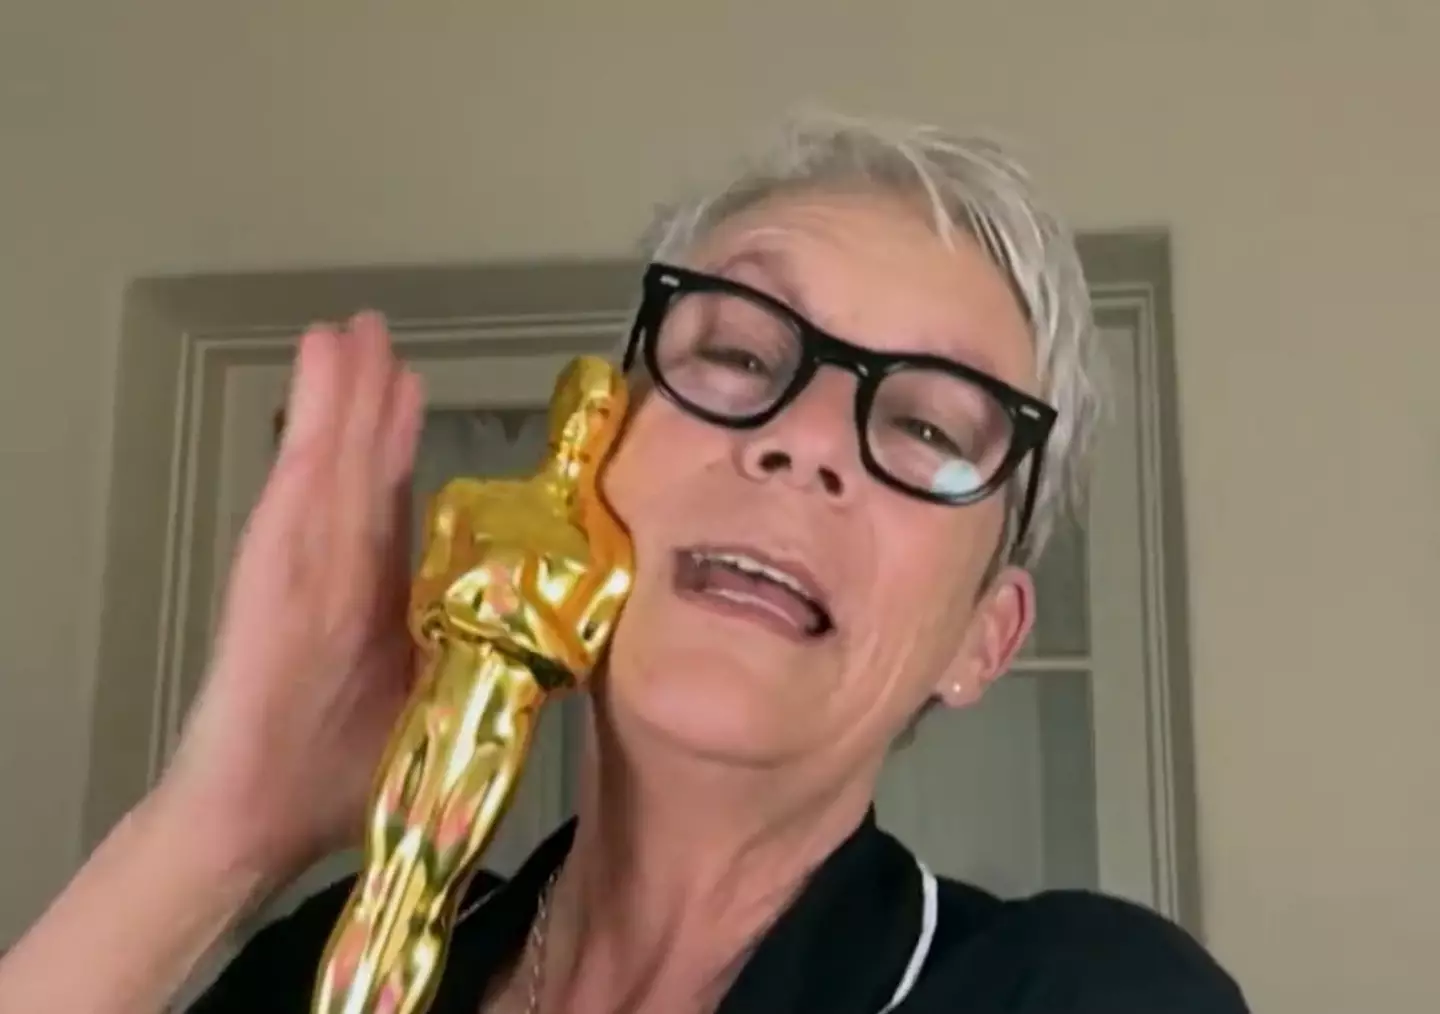 Curtis held up her Oscar for the interview, which let's face it you definitely would do if you won one.